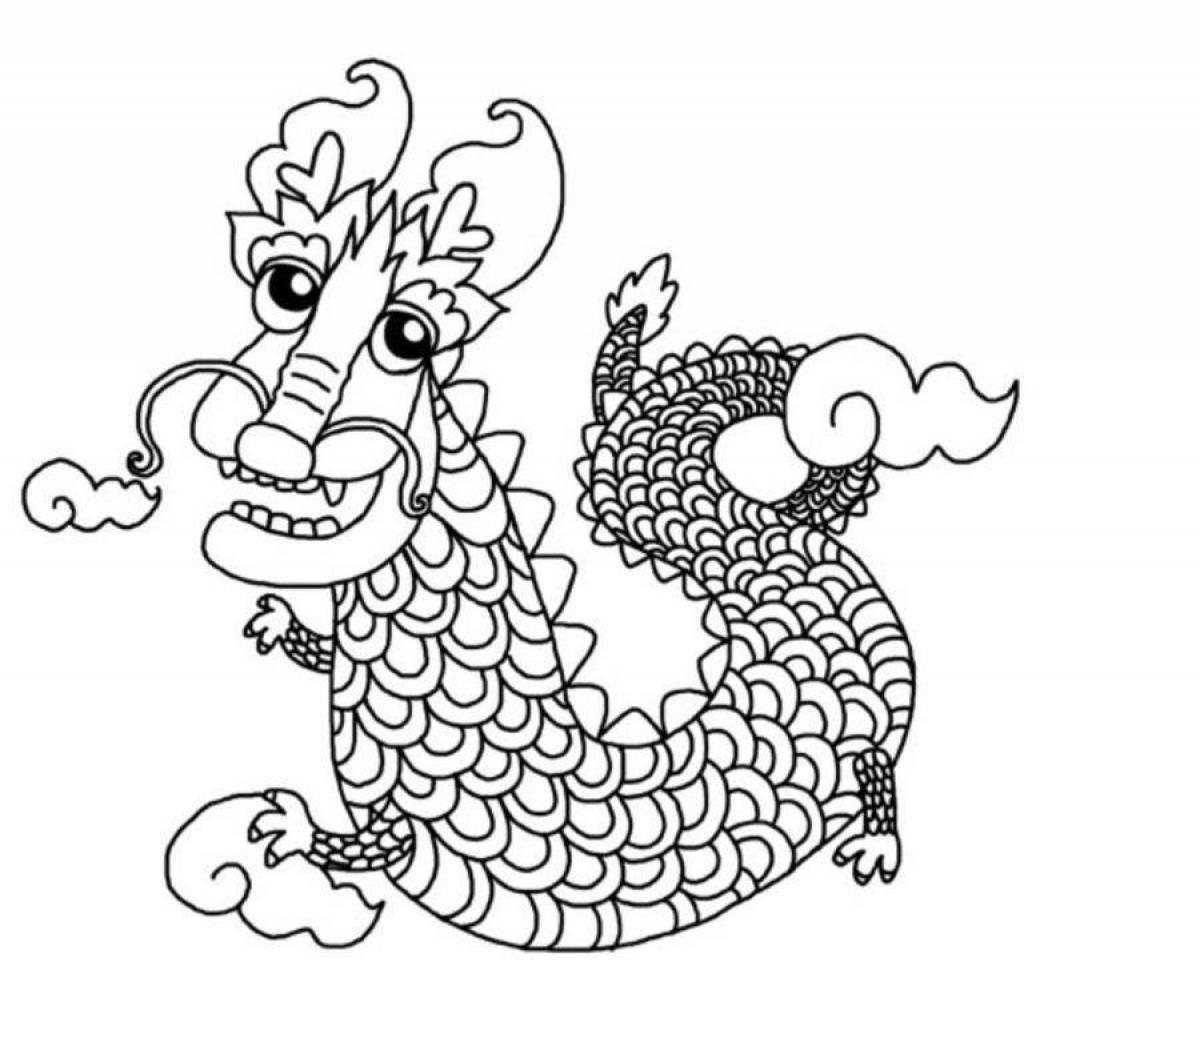 Chinese new year coloring book